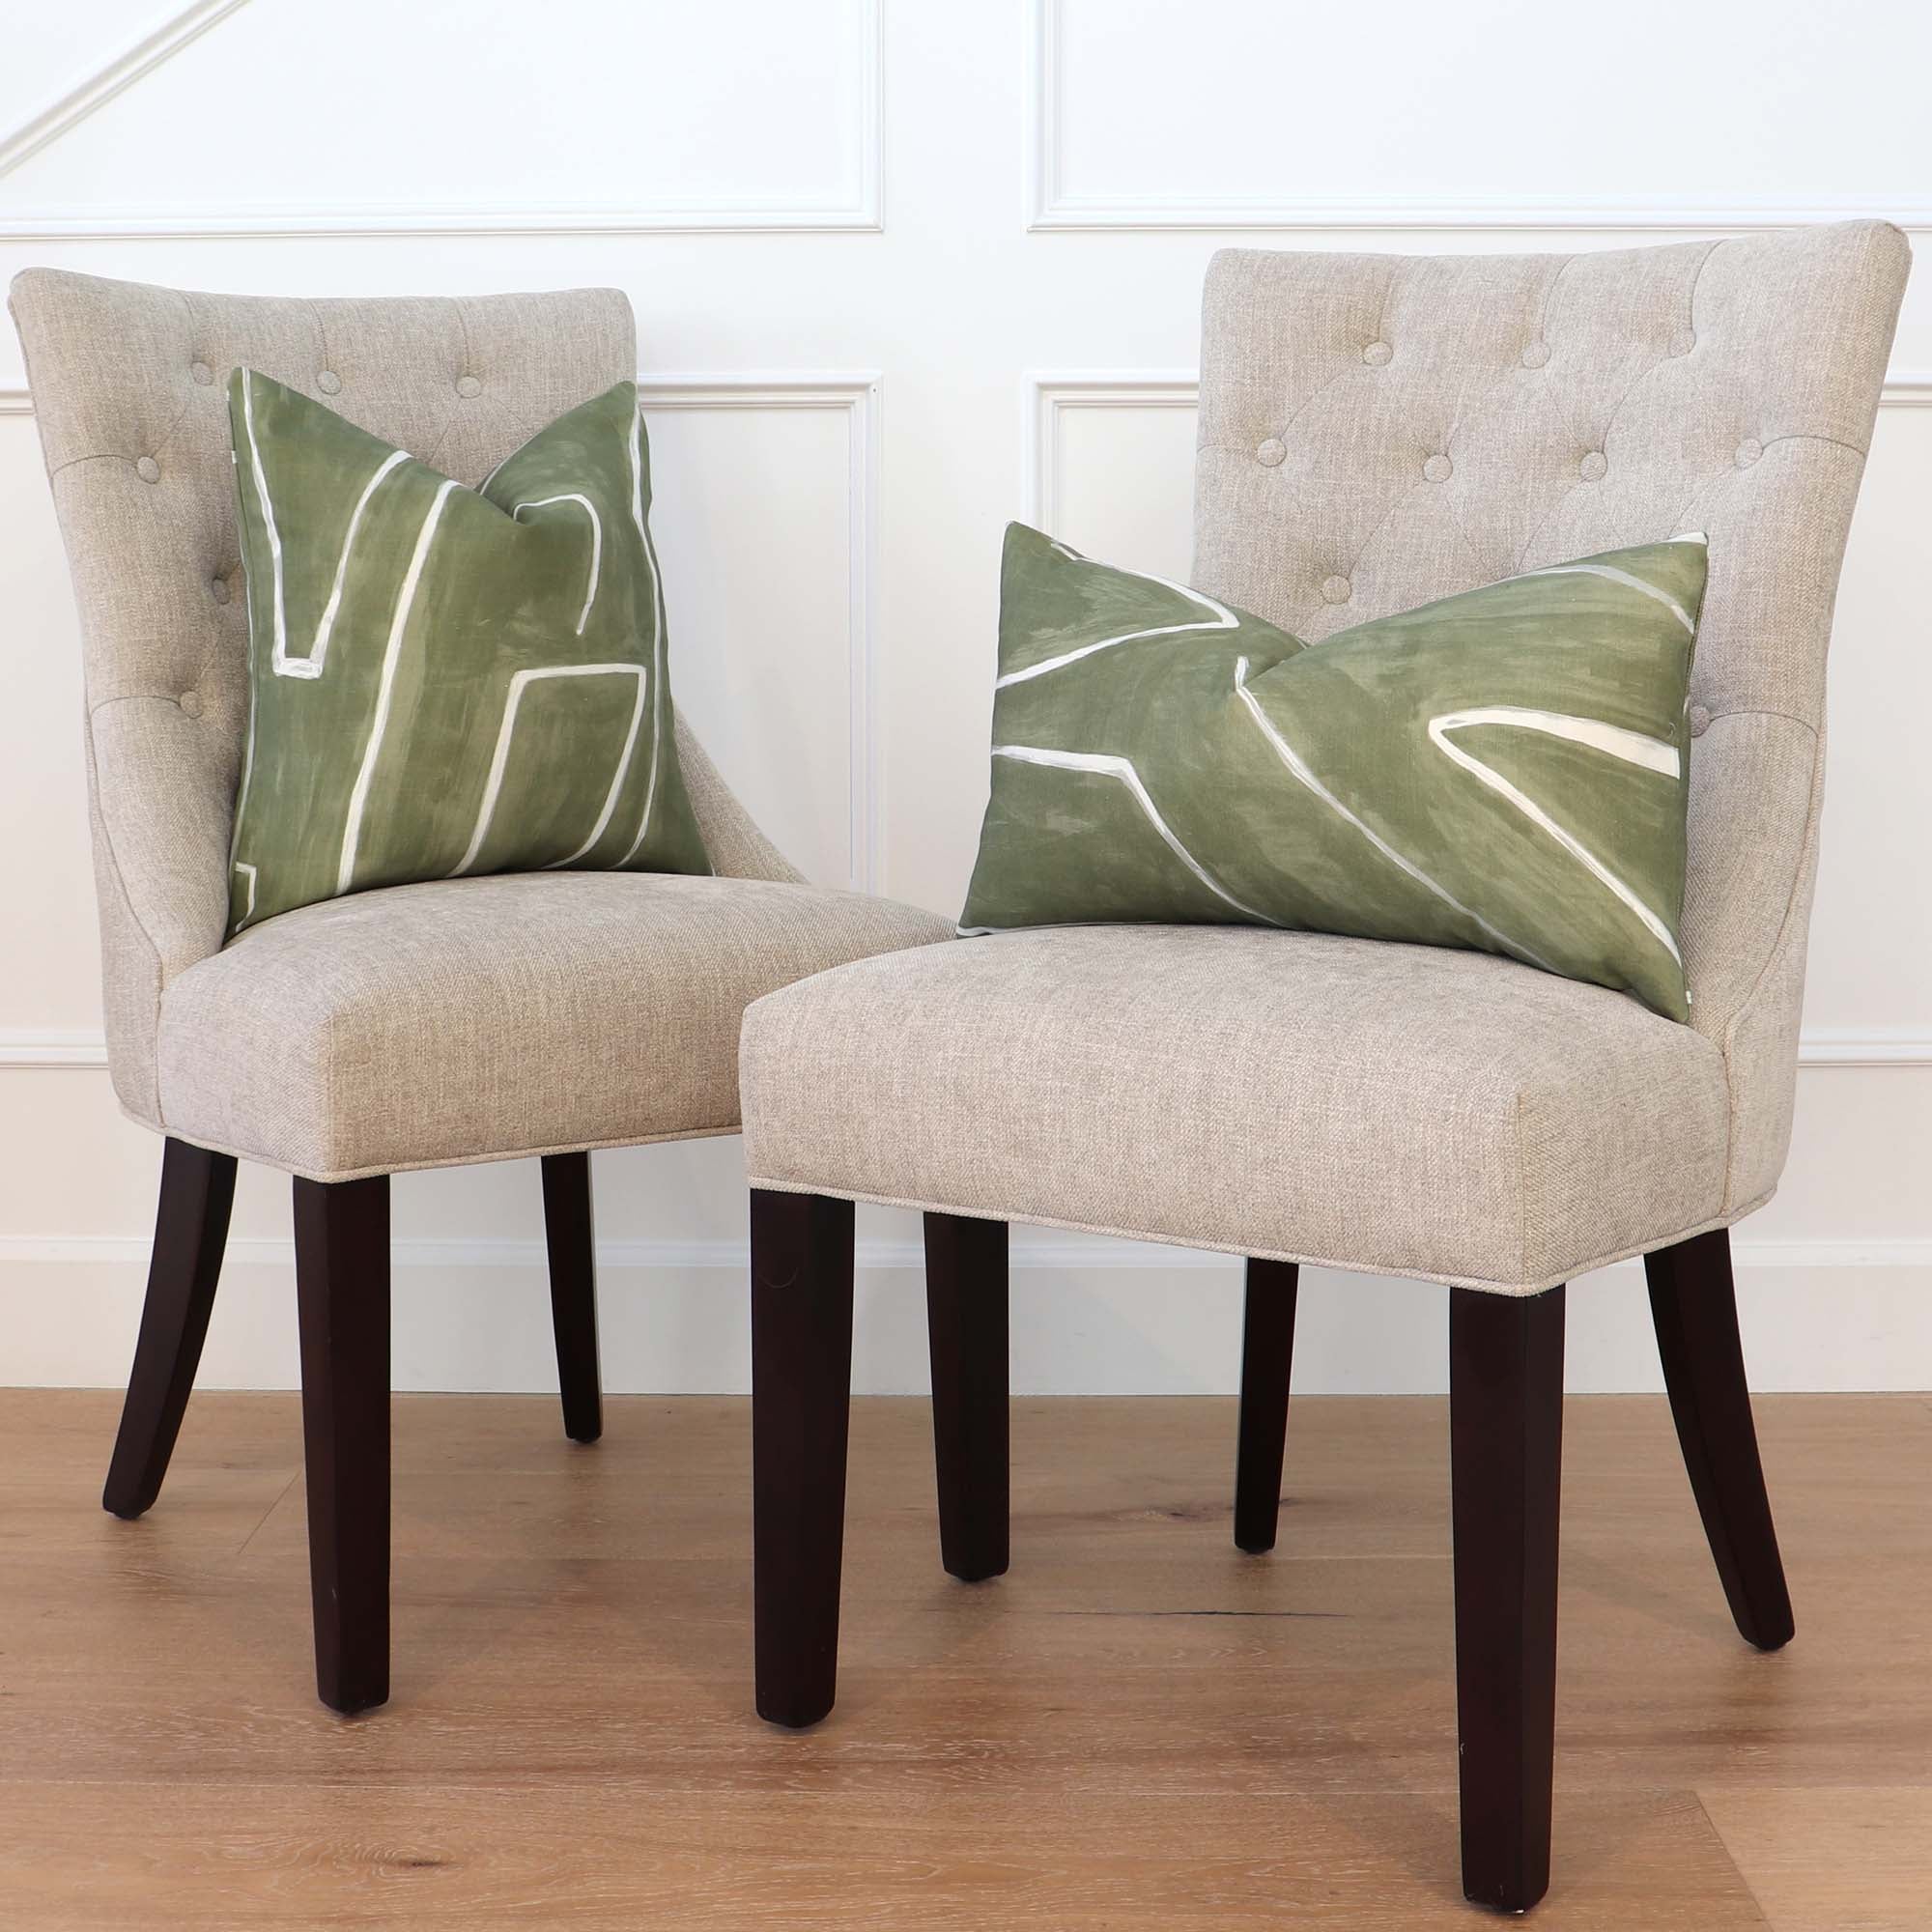 Kelly Wearstler Graffito Fern Green Designer Throw Pillow Cover on Accent Chairs